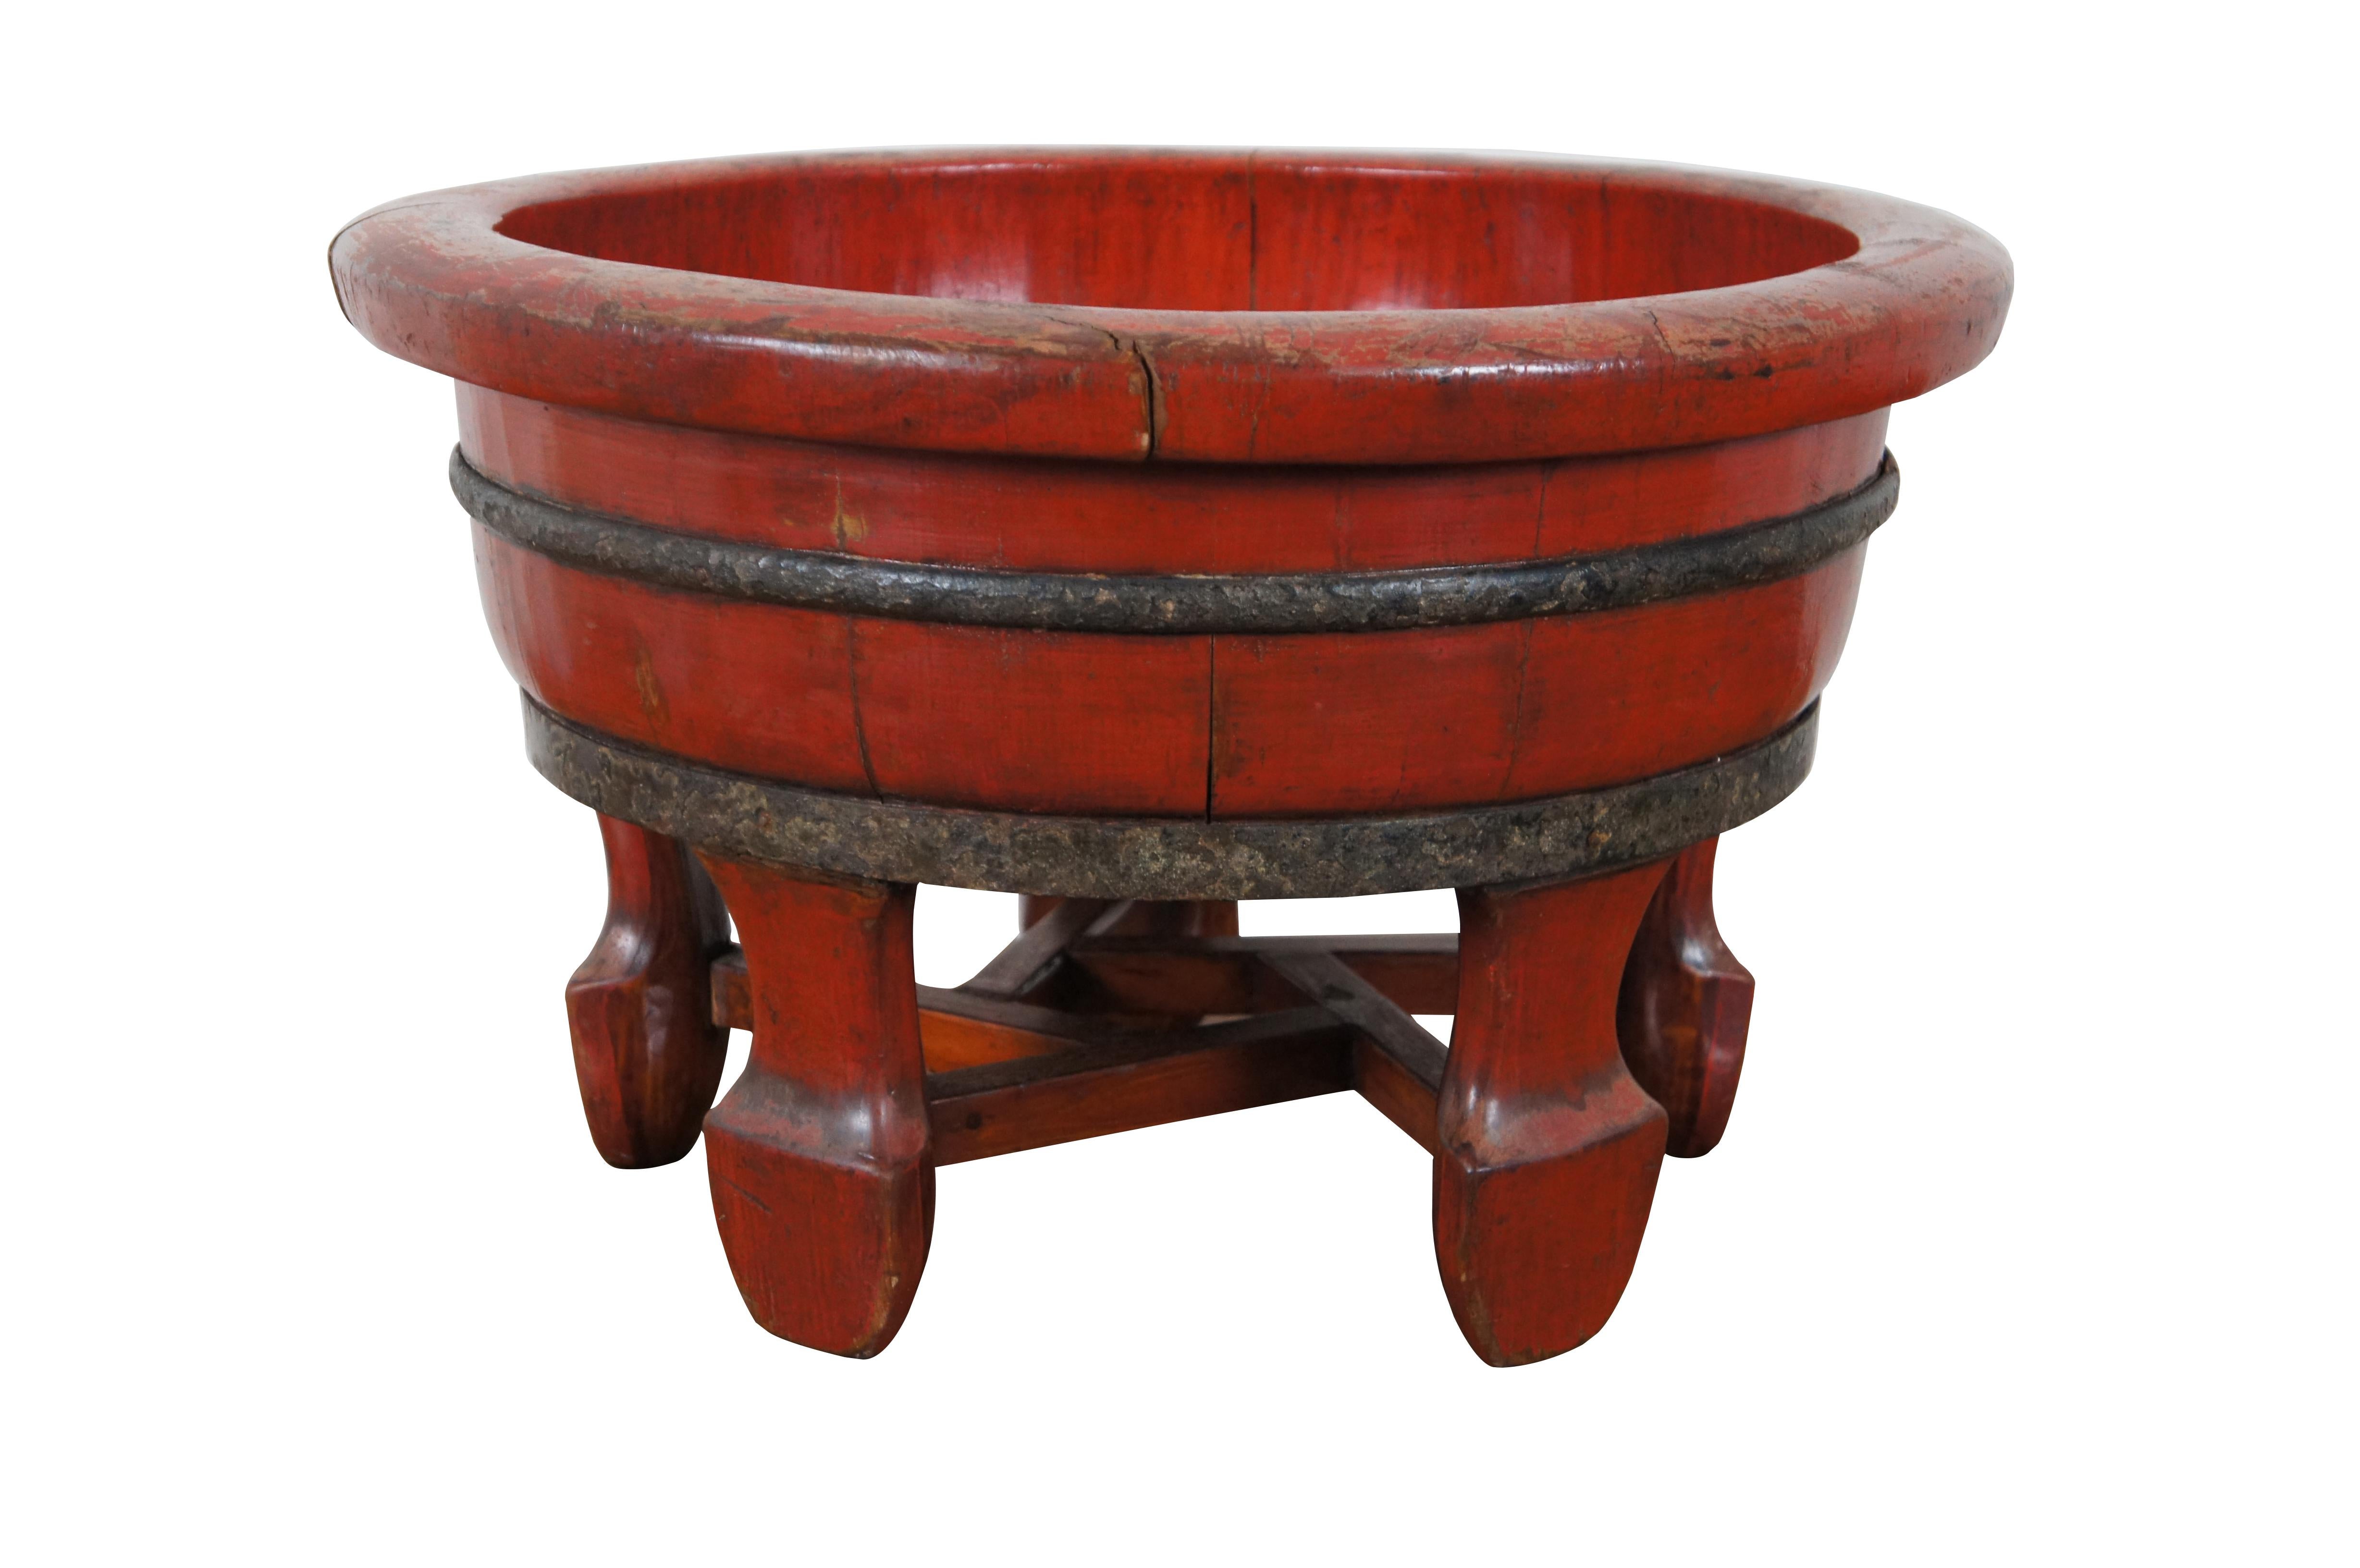 Pair of antique half-barrel shaped wooden wash / baby basins, finished in red lacquer with iron bands and five legs reinforced with pentagonal stretchers. Sticker on bases from previous re-seller.

In the pre-industrial world, the wash basin was a